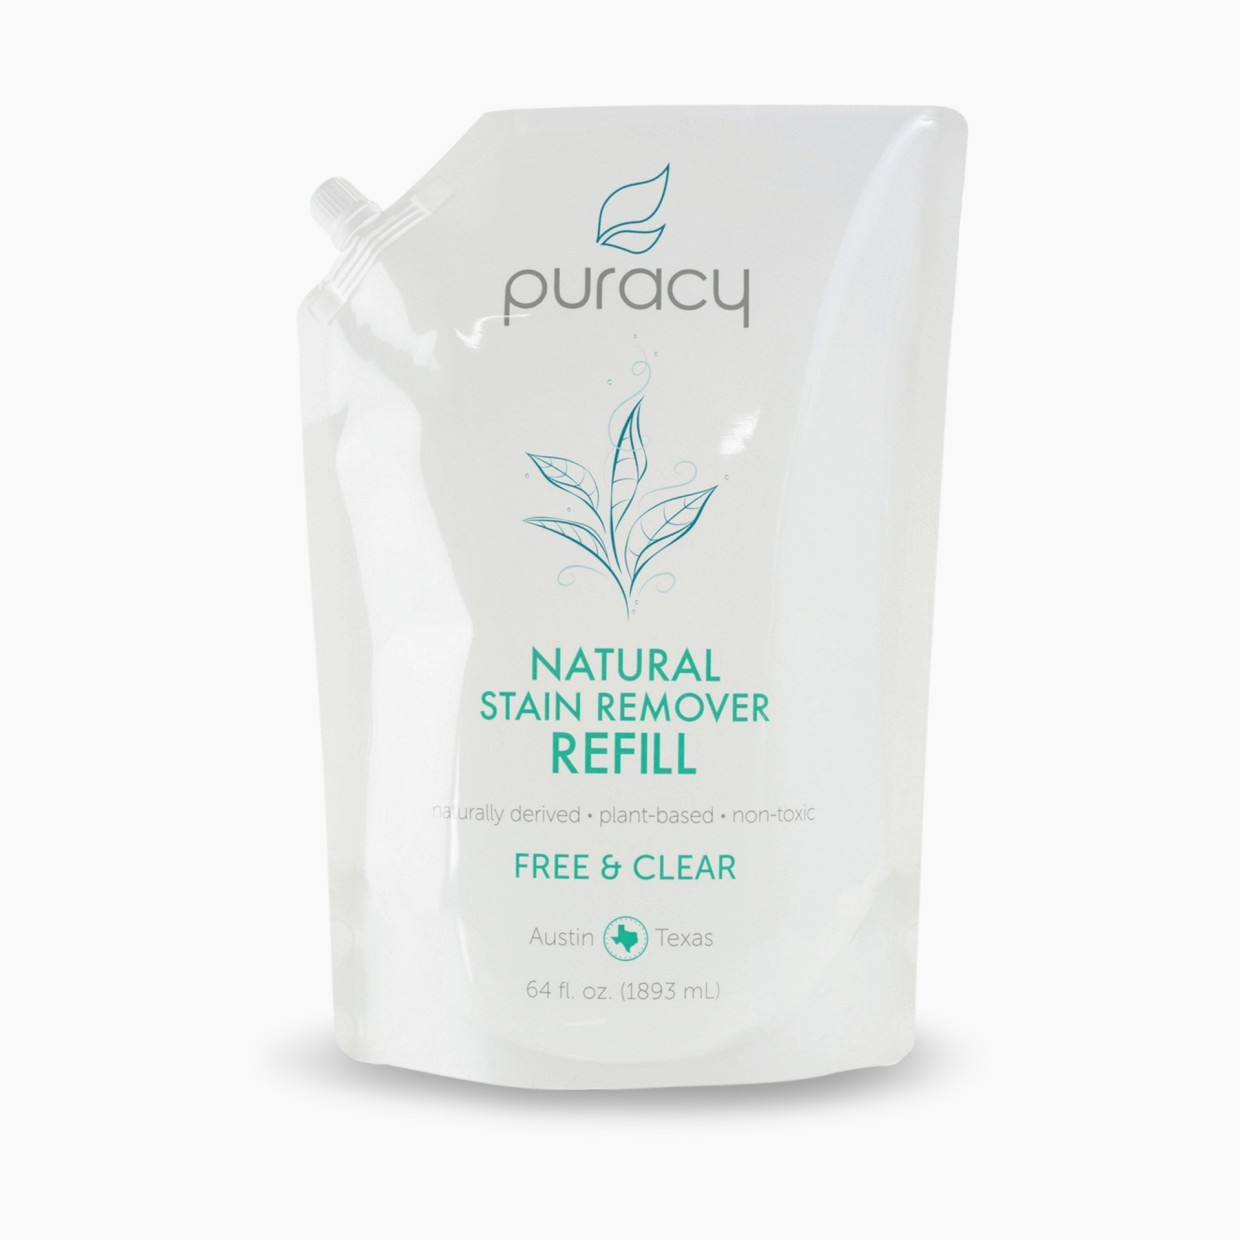 Puracy Natural Stain Remover Refill - Free & Clear, 64 oz.